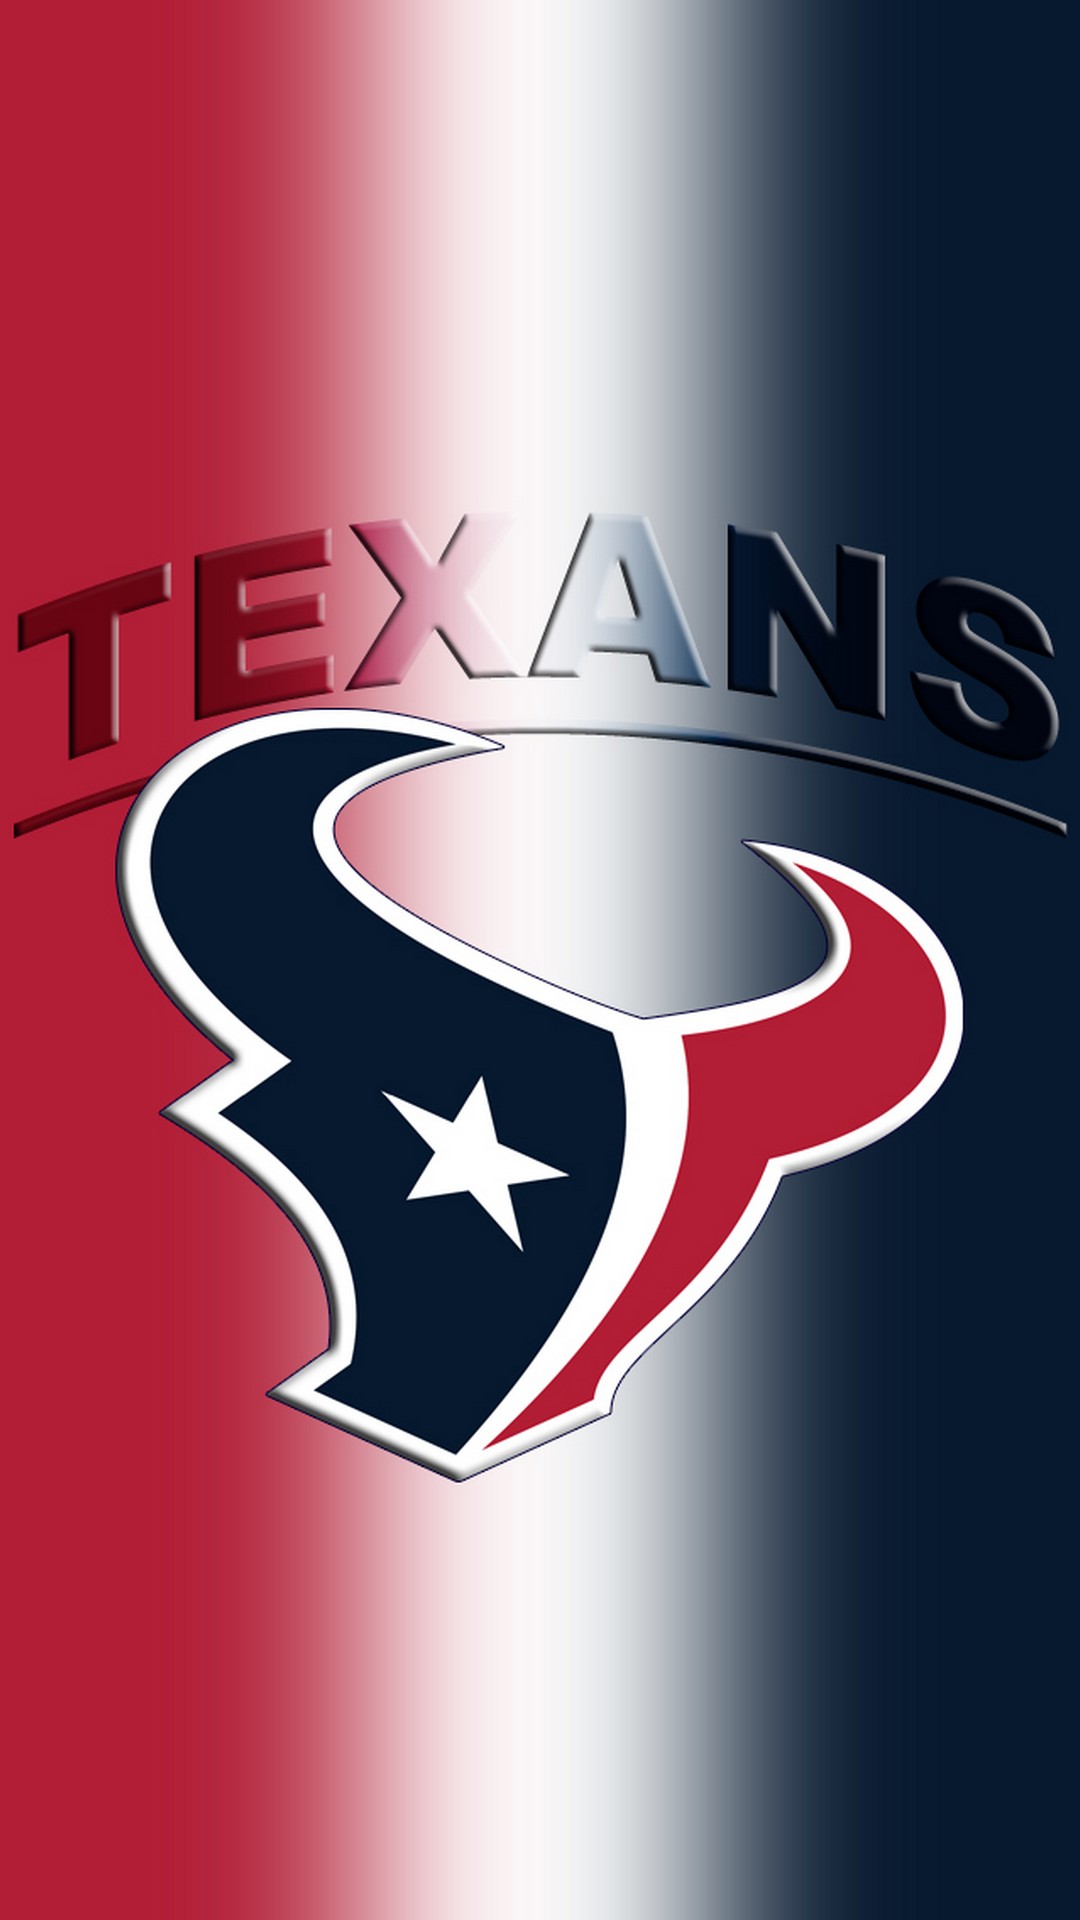 Houston Texans iPhone Screen Lock Wallpaper With high-resolution 1080X1920 pixel. Download and set as wallpaper for Apple iPhone X, XS Max, XR, 8, 7, 6, SE, iPad, Android